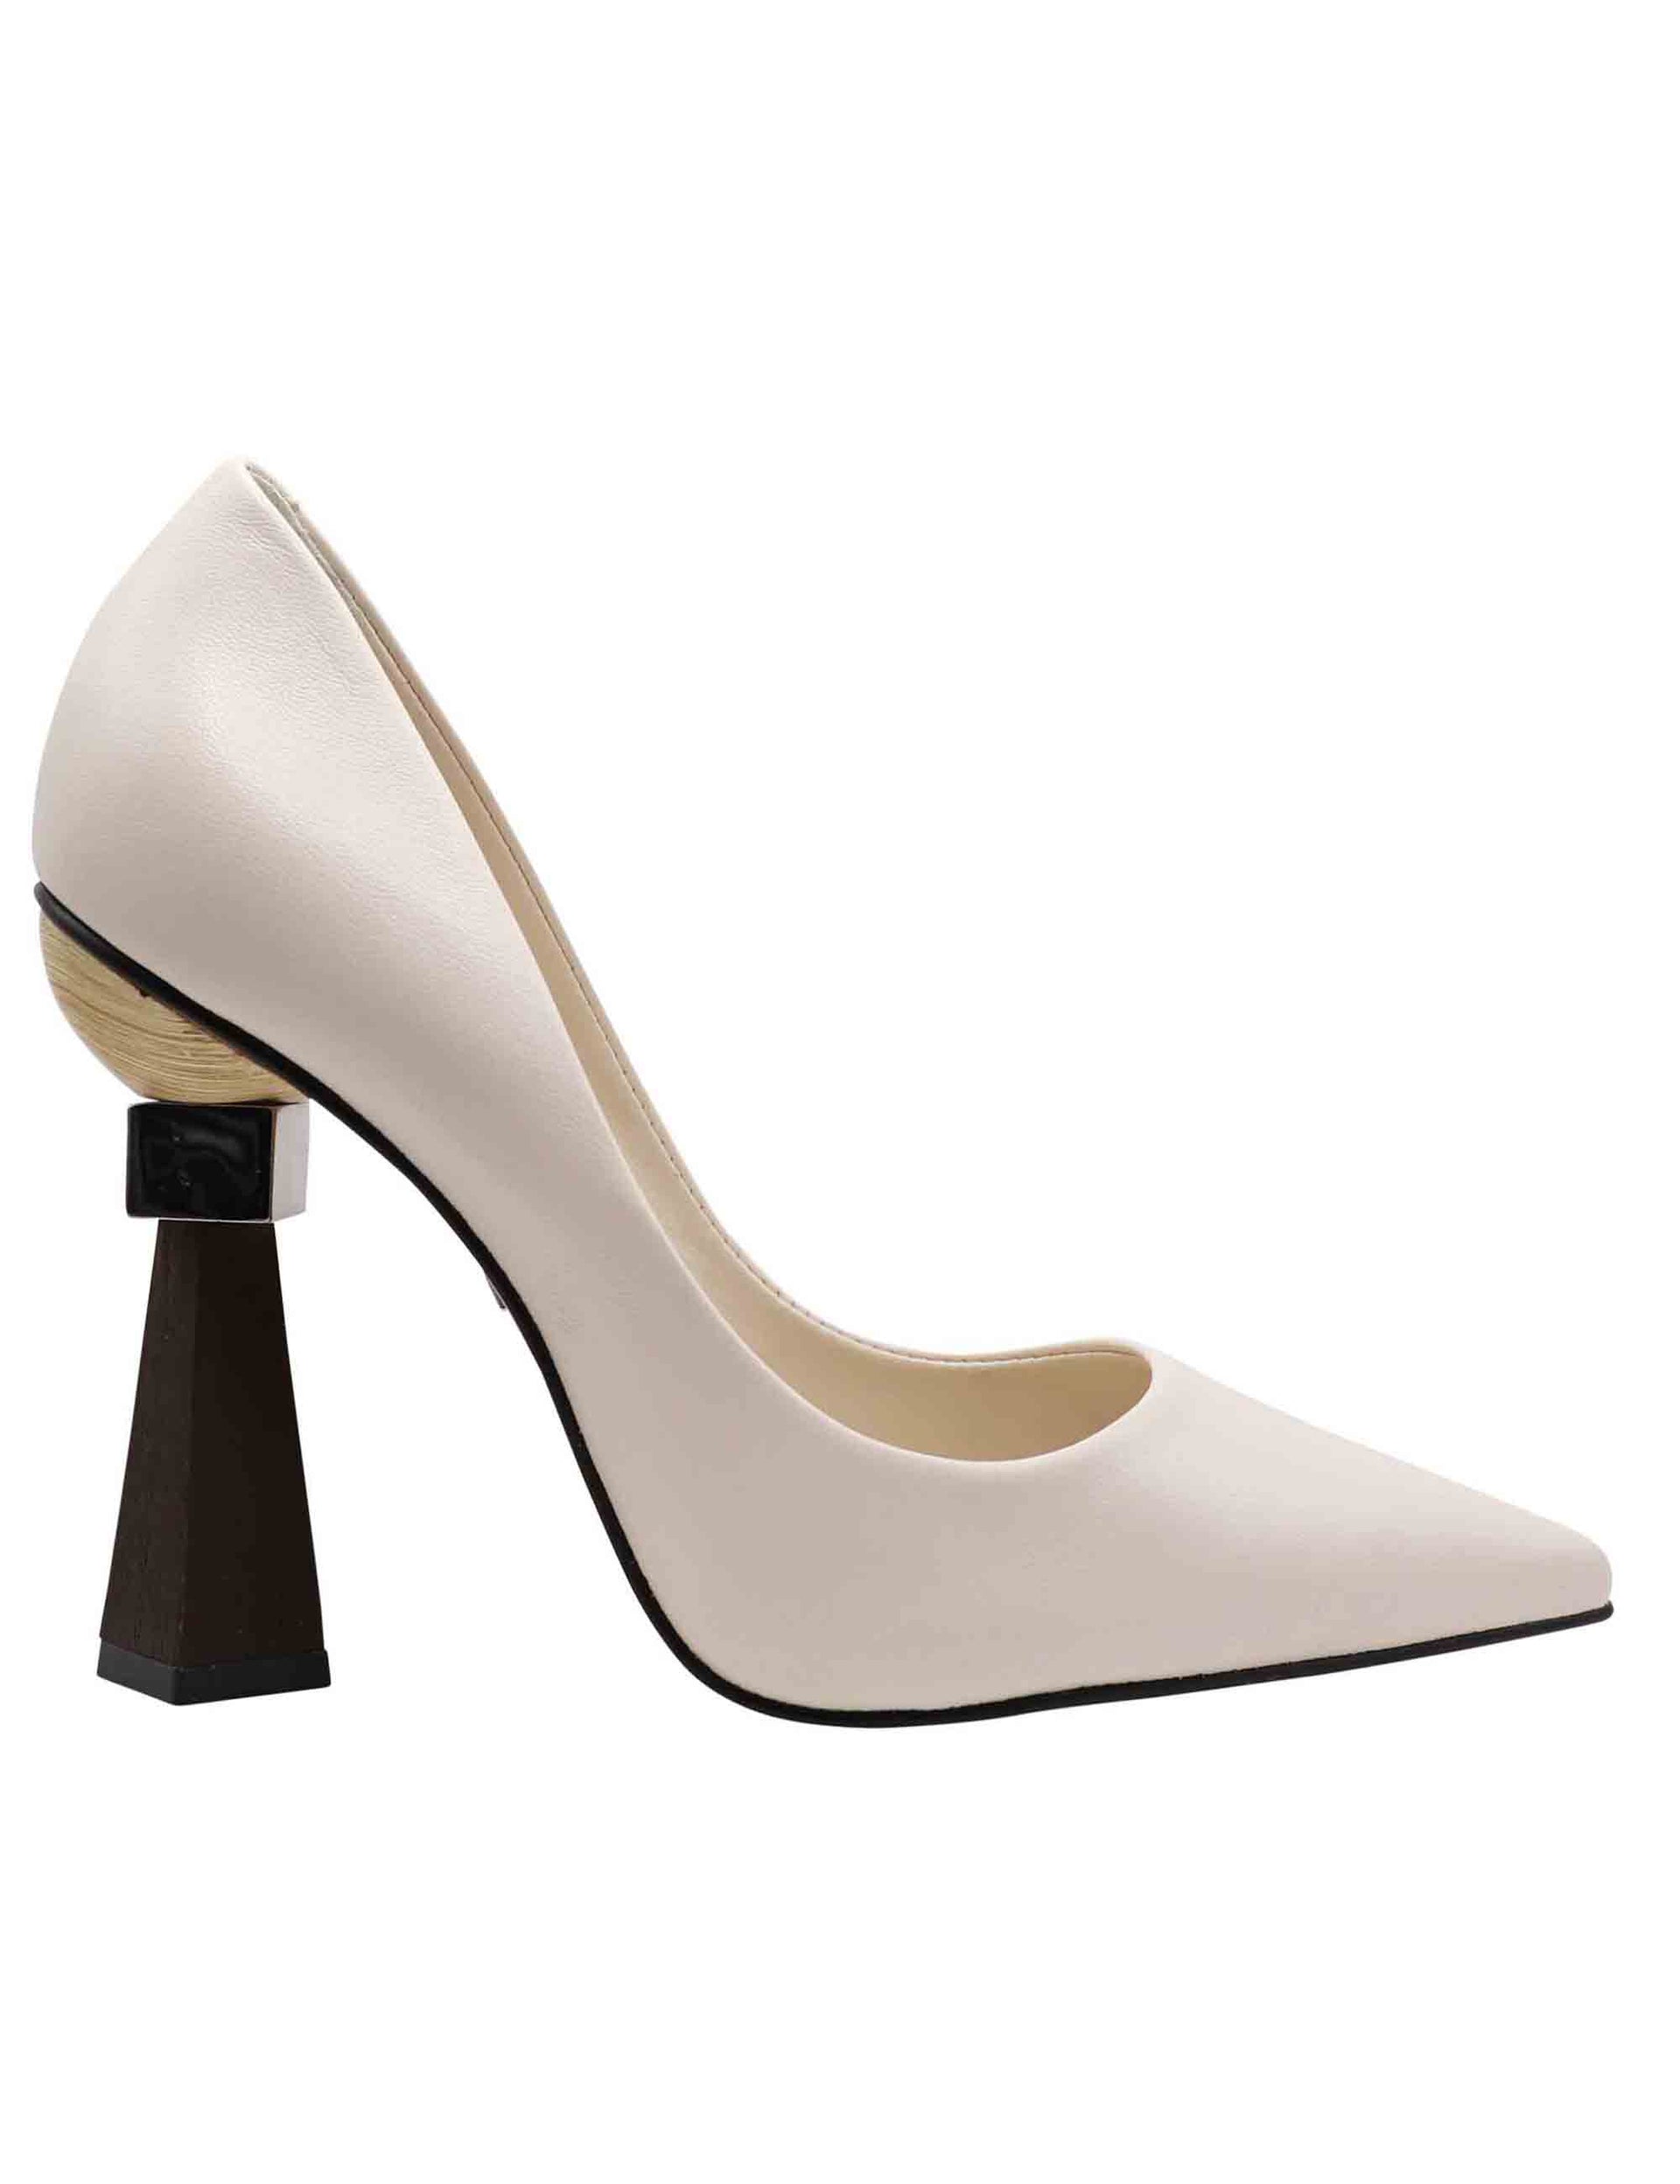 Women's ivory leather pumps with high heel and pointed toe